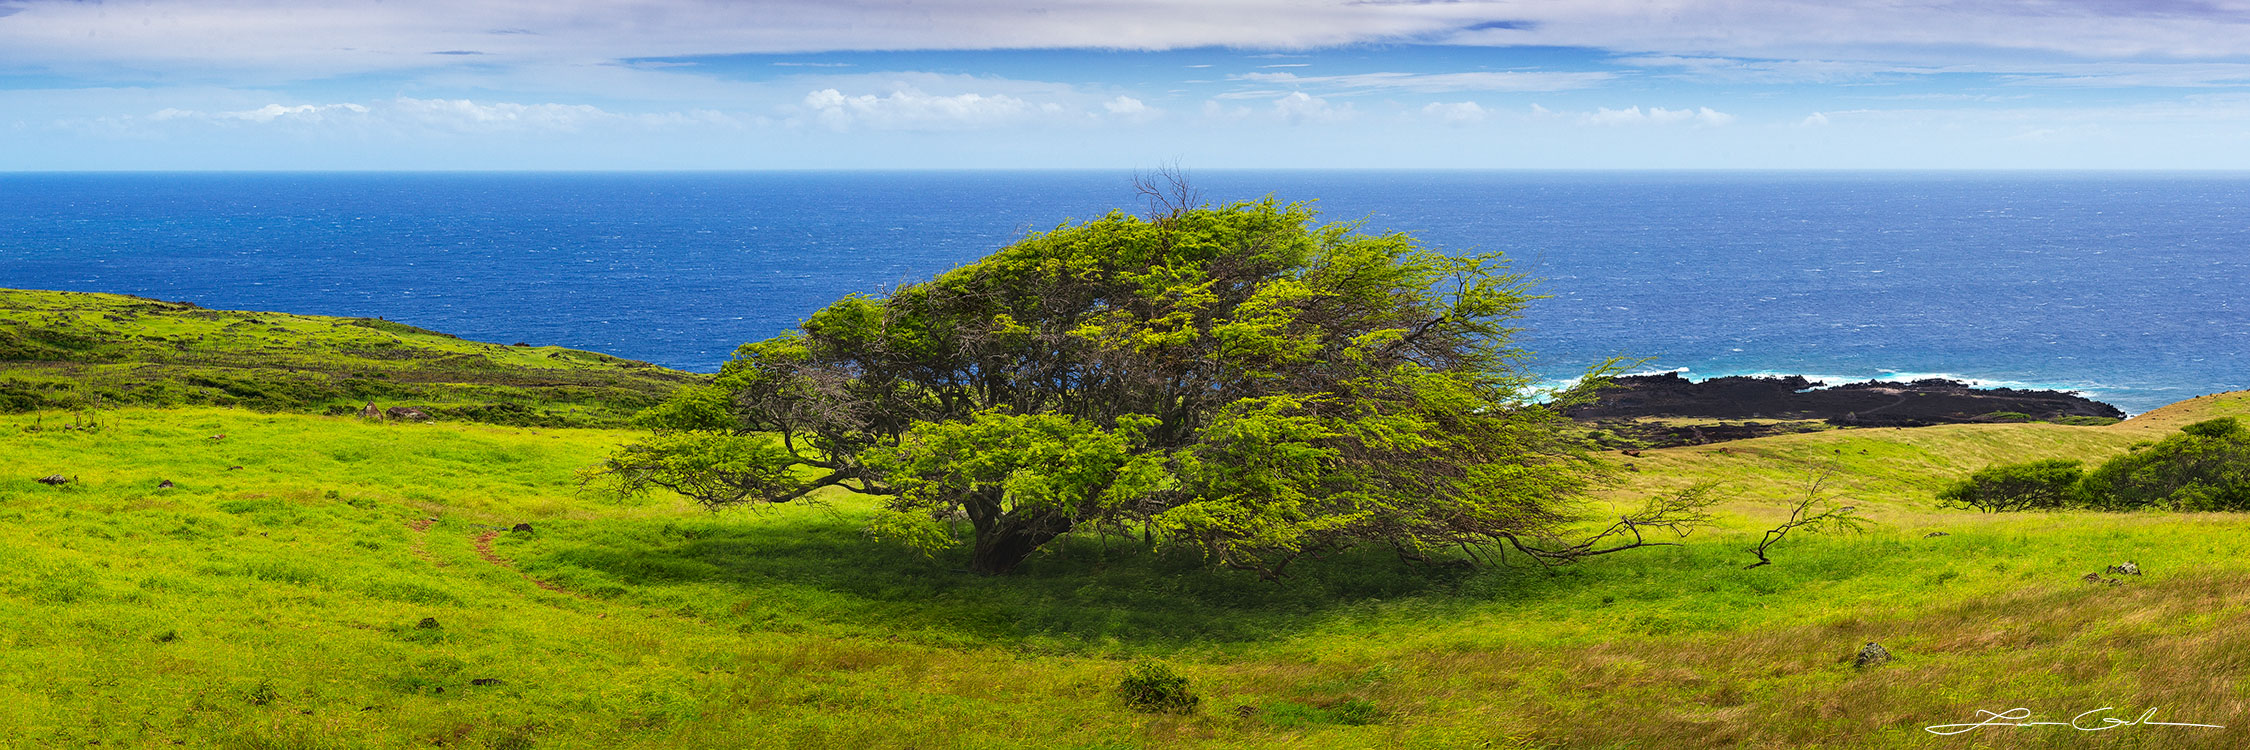 Pano of vast green Maui fields with a lone, wind-shaped tree and the boundless ocean in the backdrop - Gintchin Fine Art.